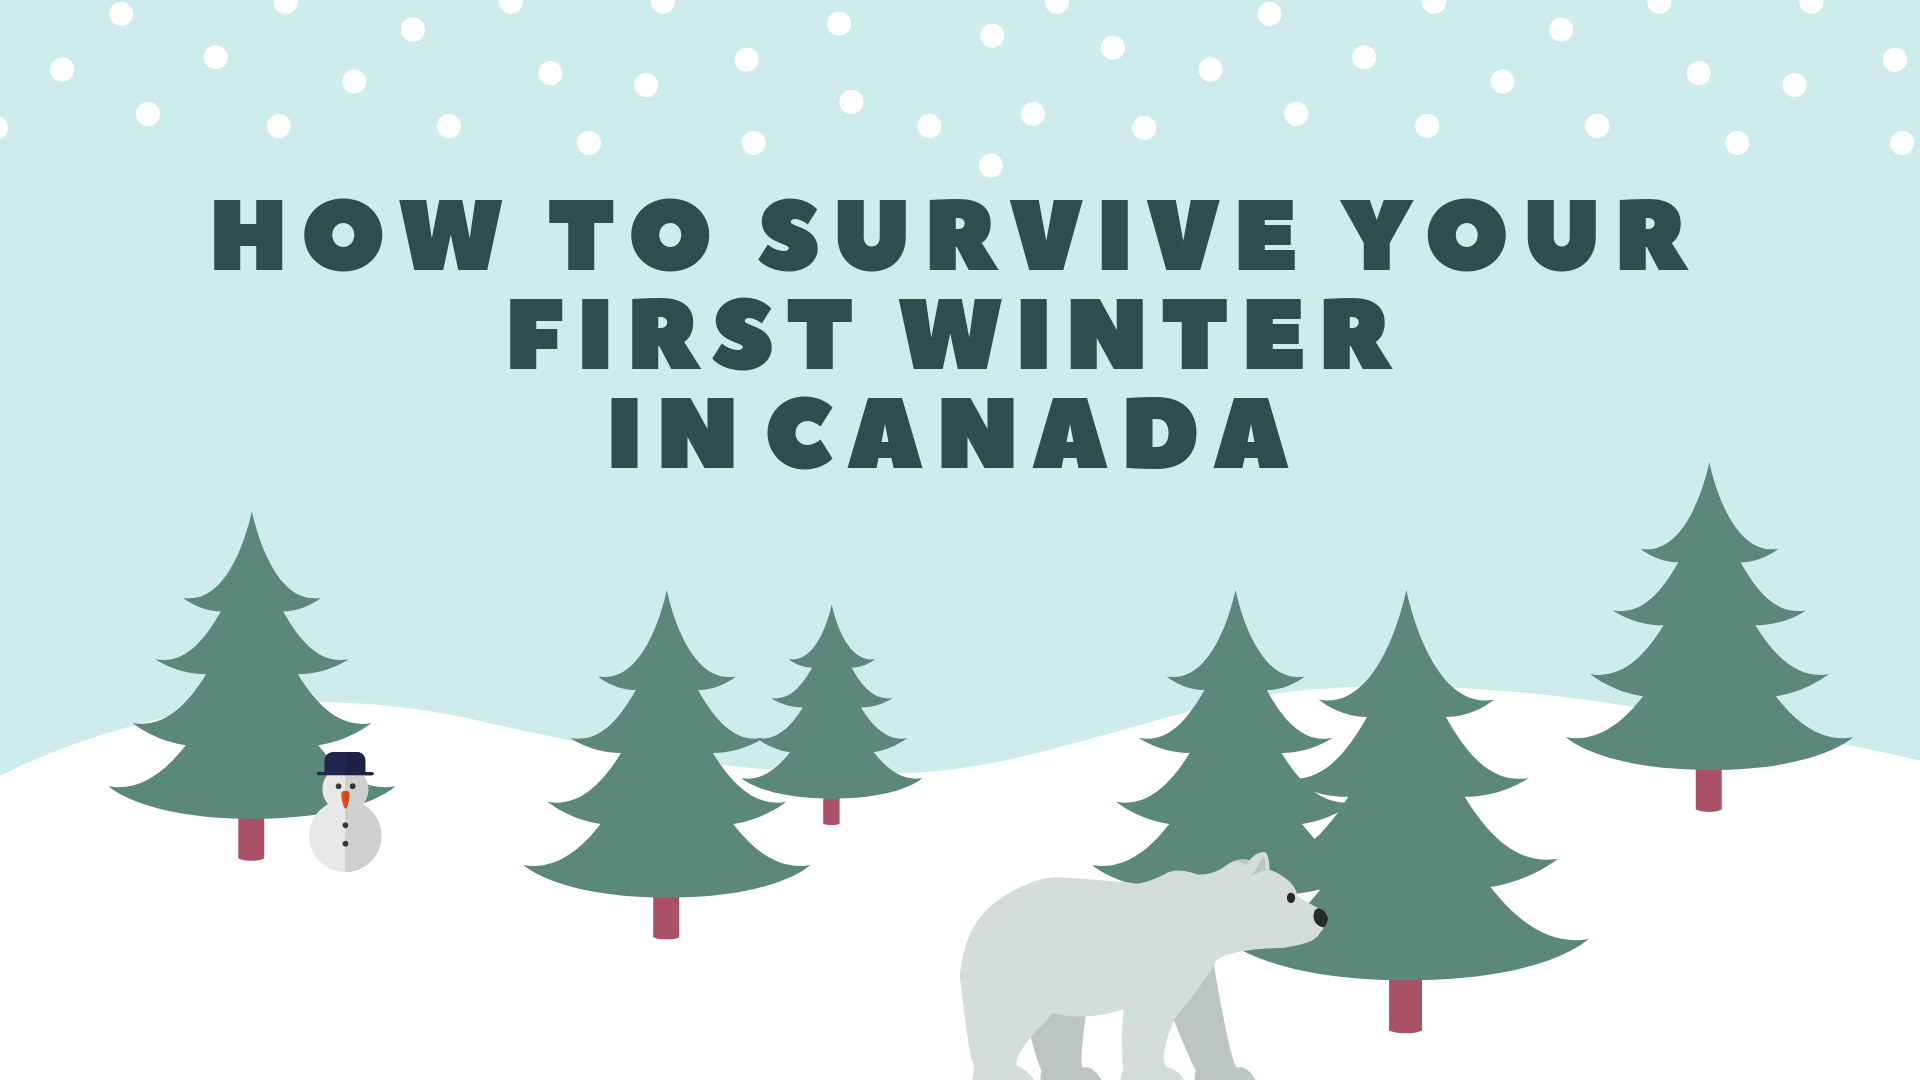 how-to-survive-your-first-winter-in-canada-1xxzcleuhklyfoc64nqcehg.png